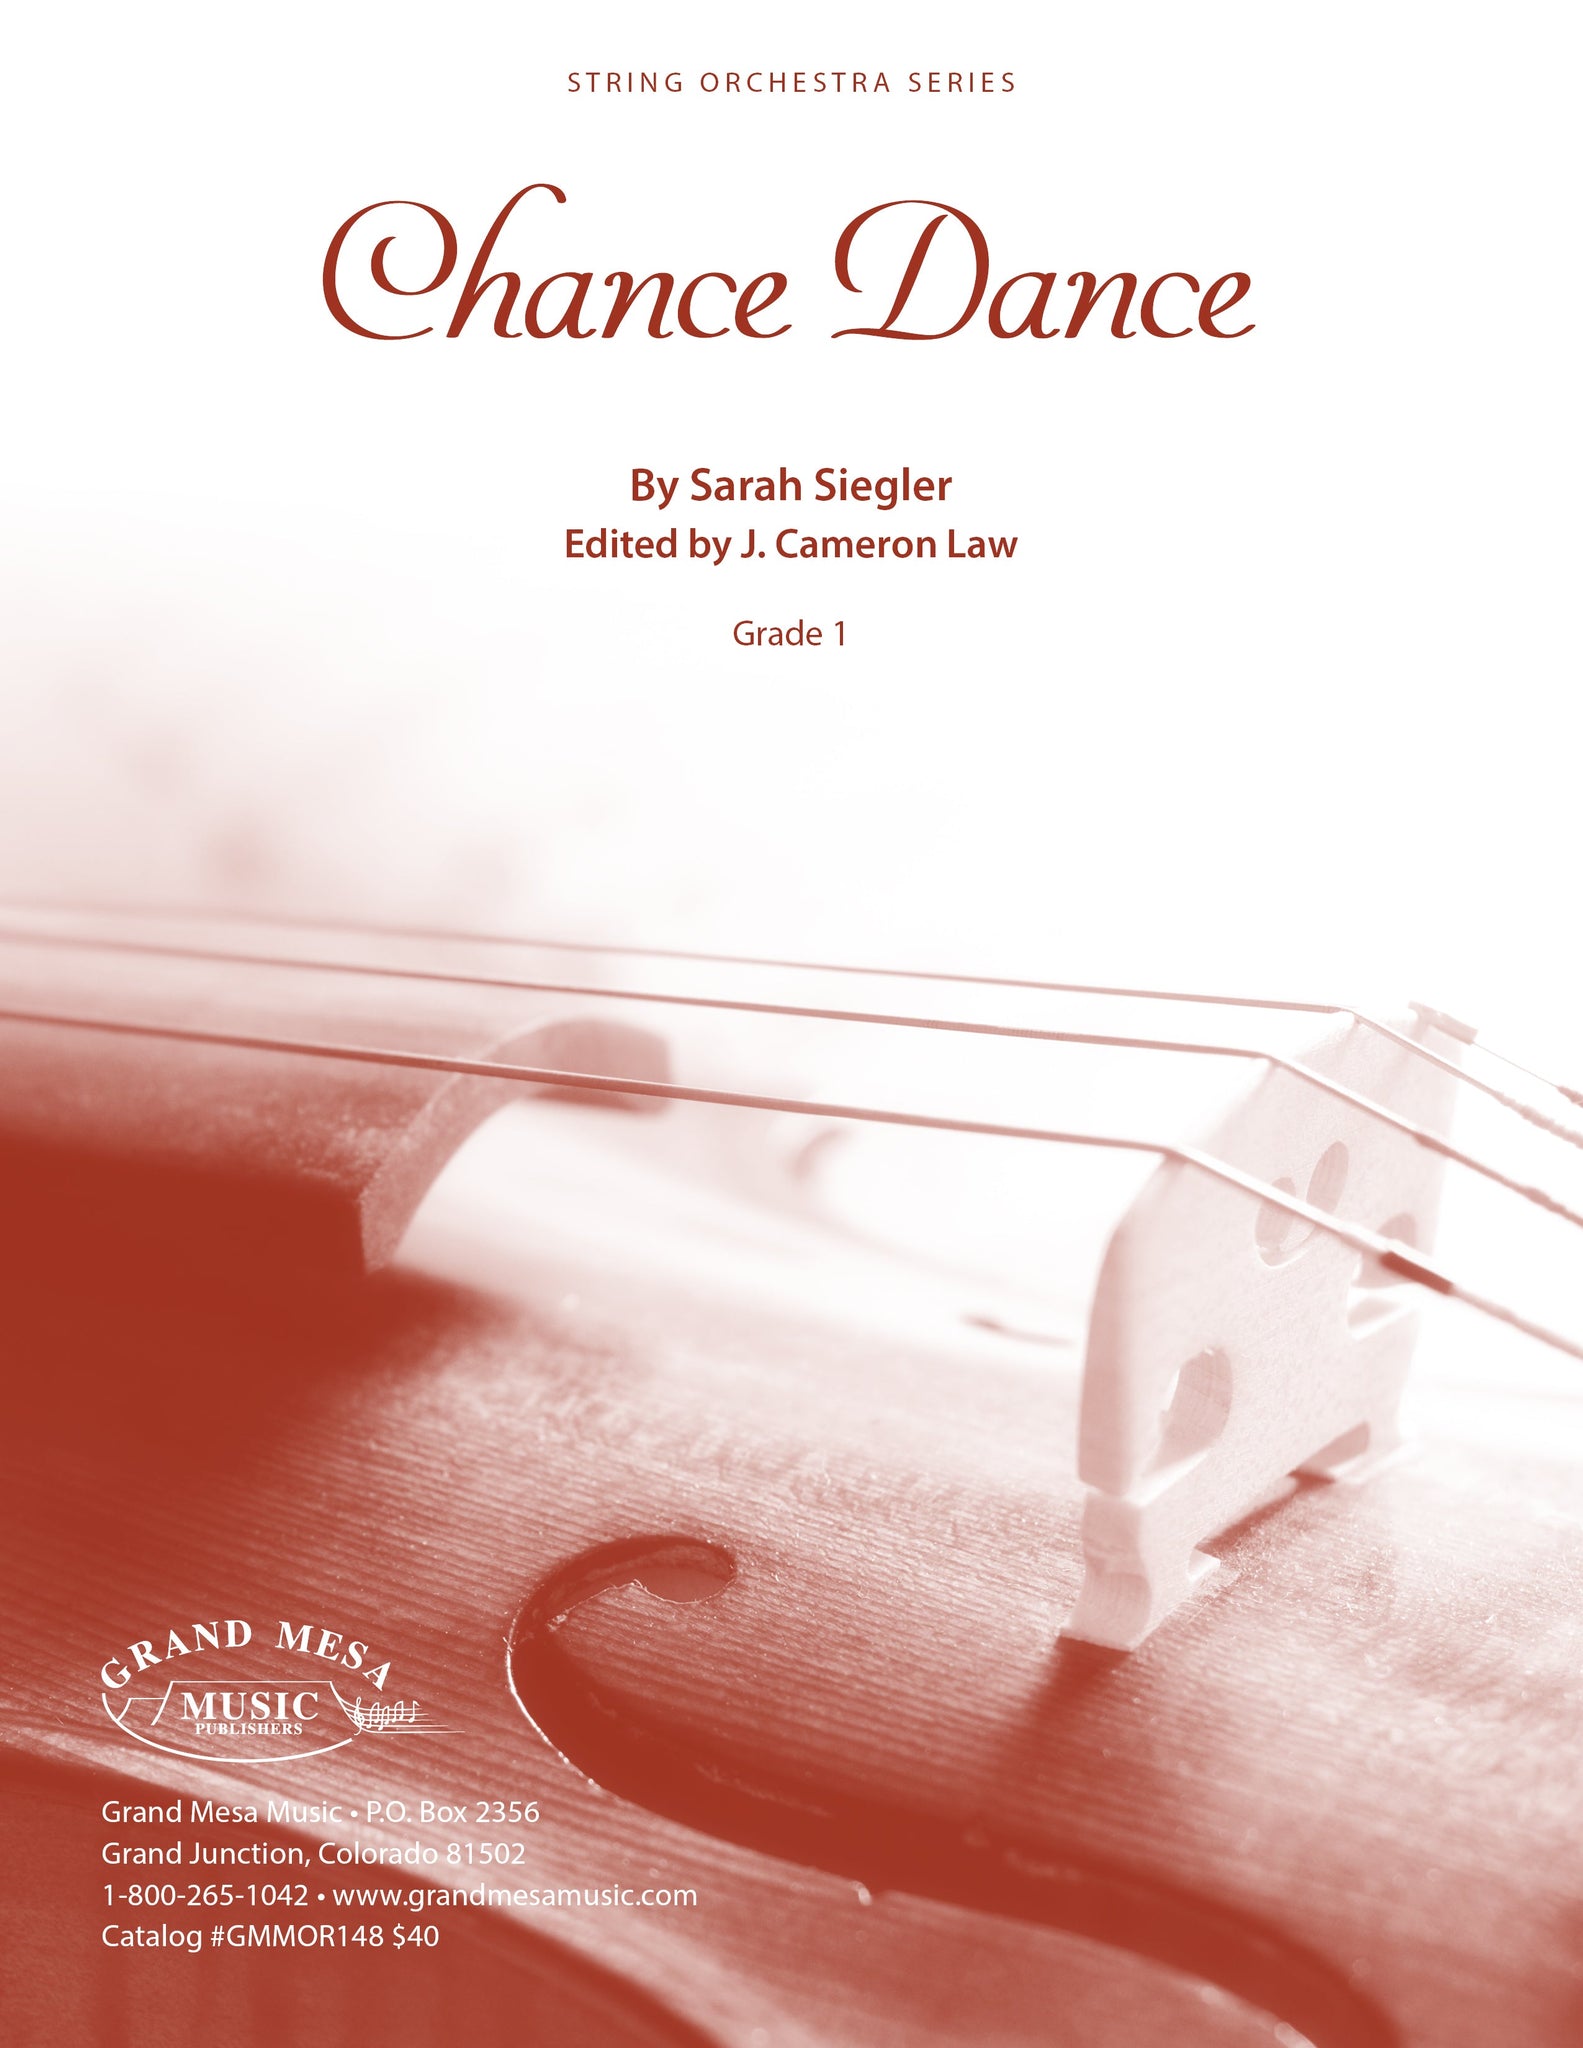 Strings sheet music cover of Chance Dance, composed by Sarah Siegler.